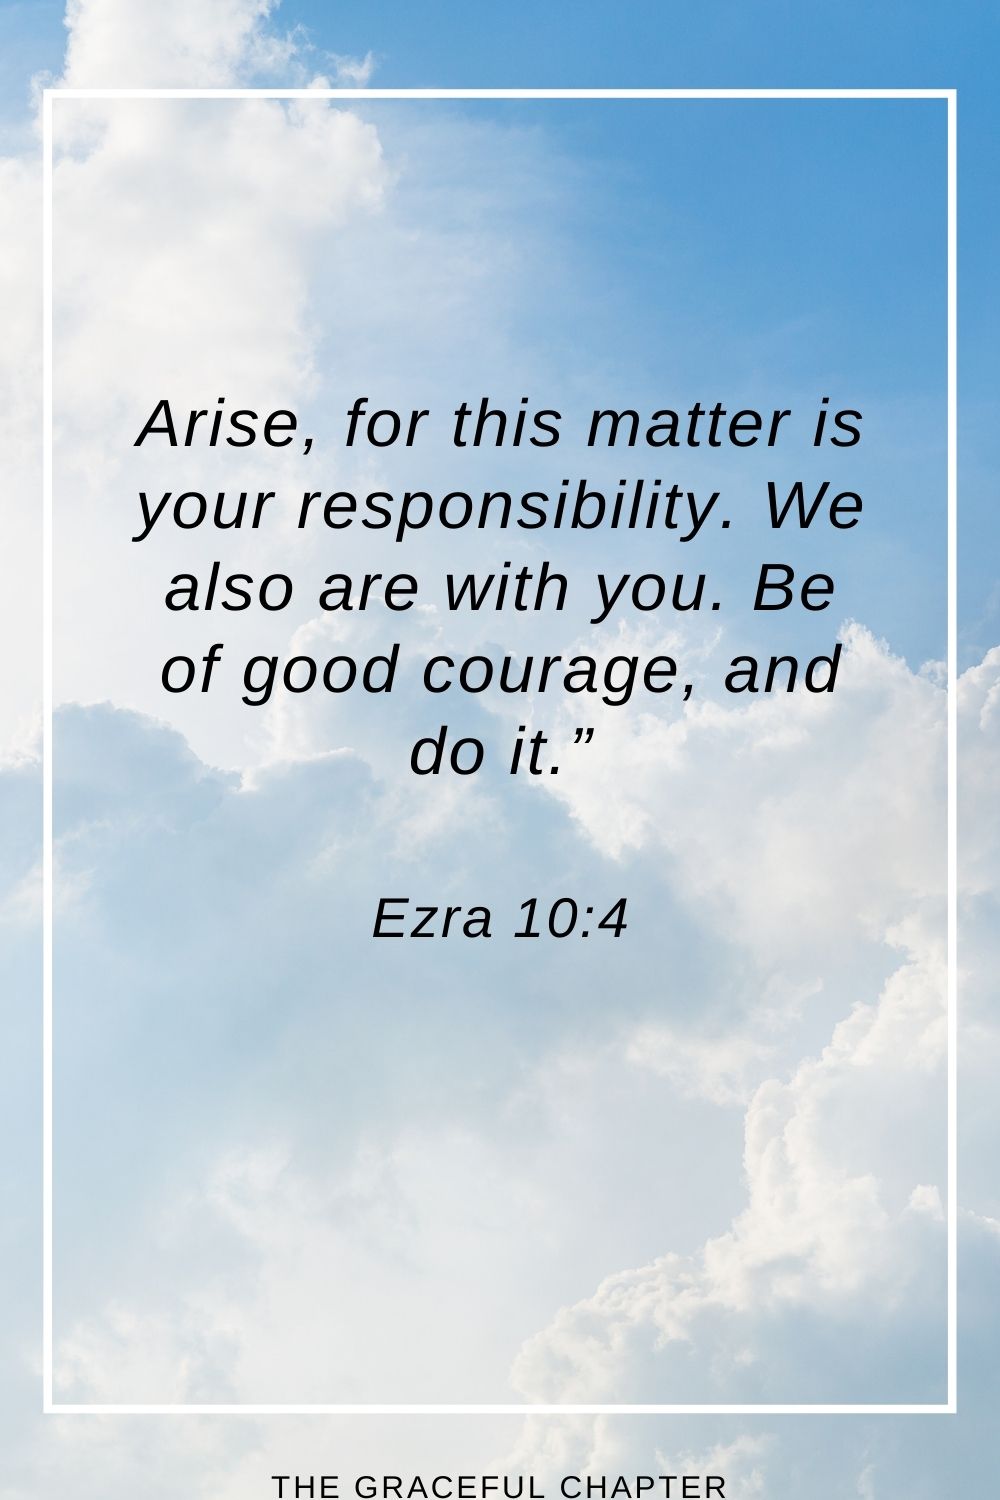 Arise, for this matter is your responsibility. We also are with you. Be of good courage, and do it.” Ezra 10:4